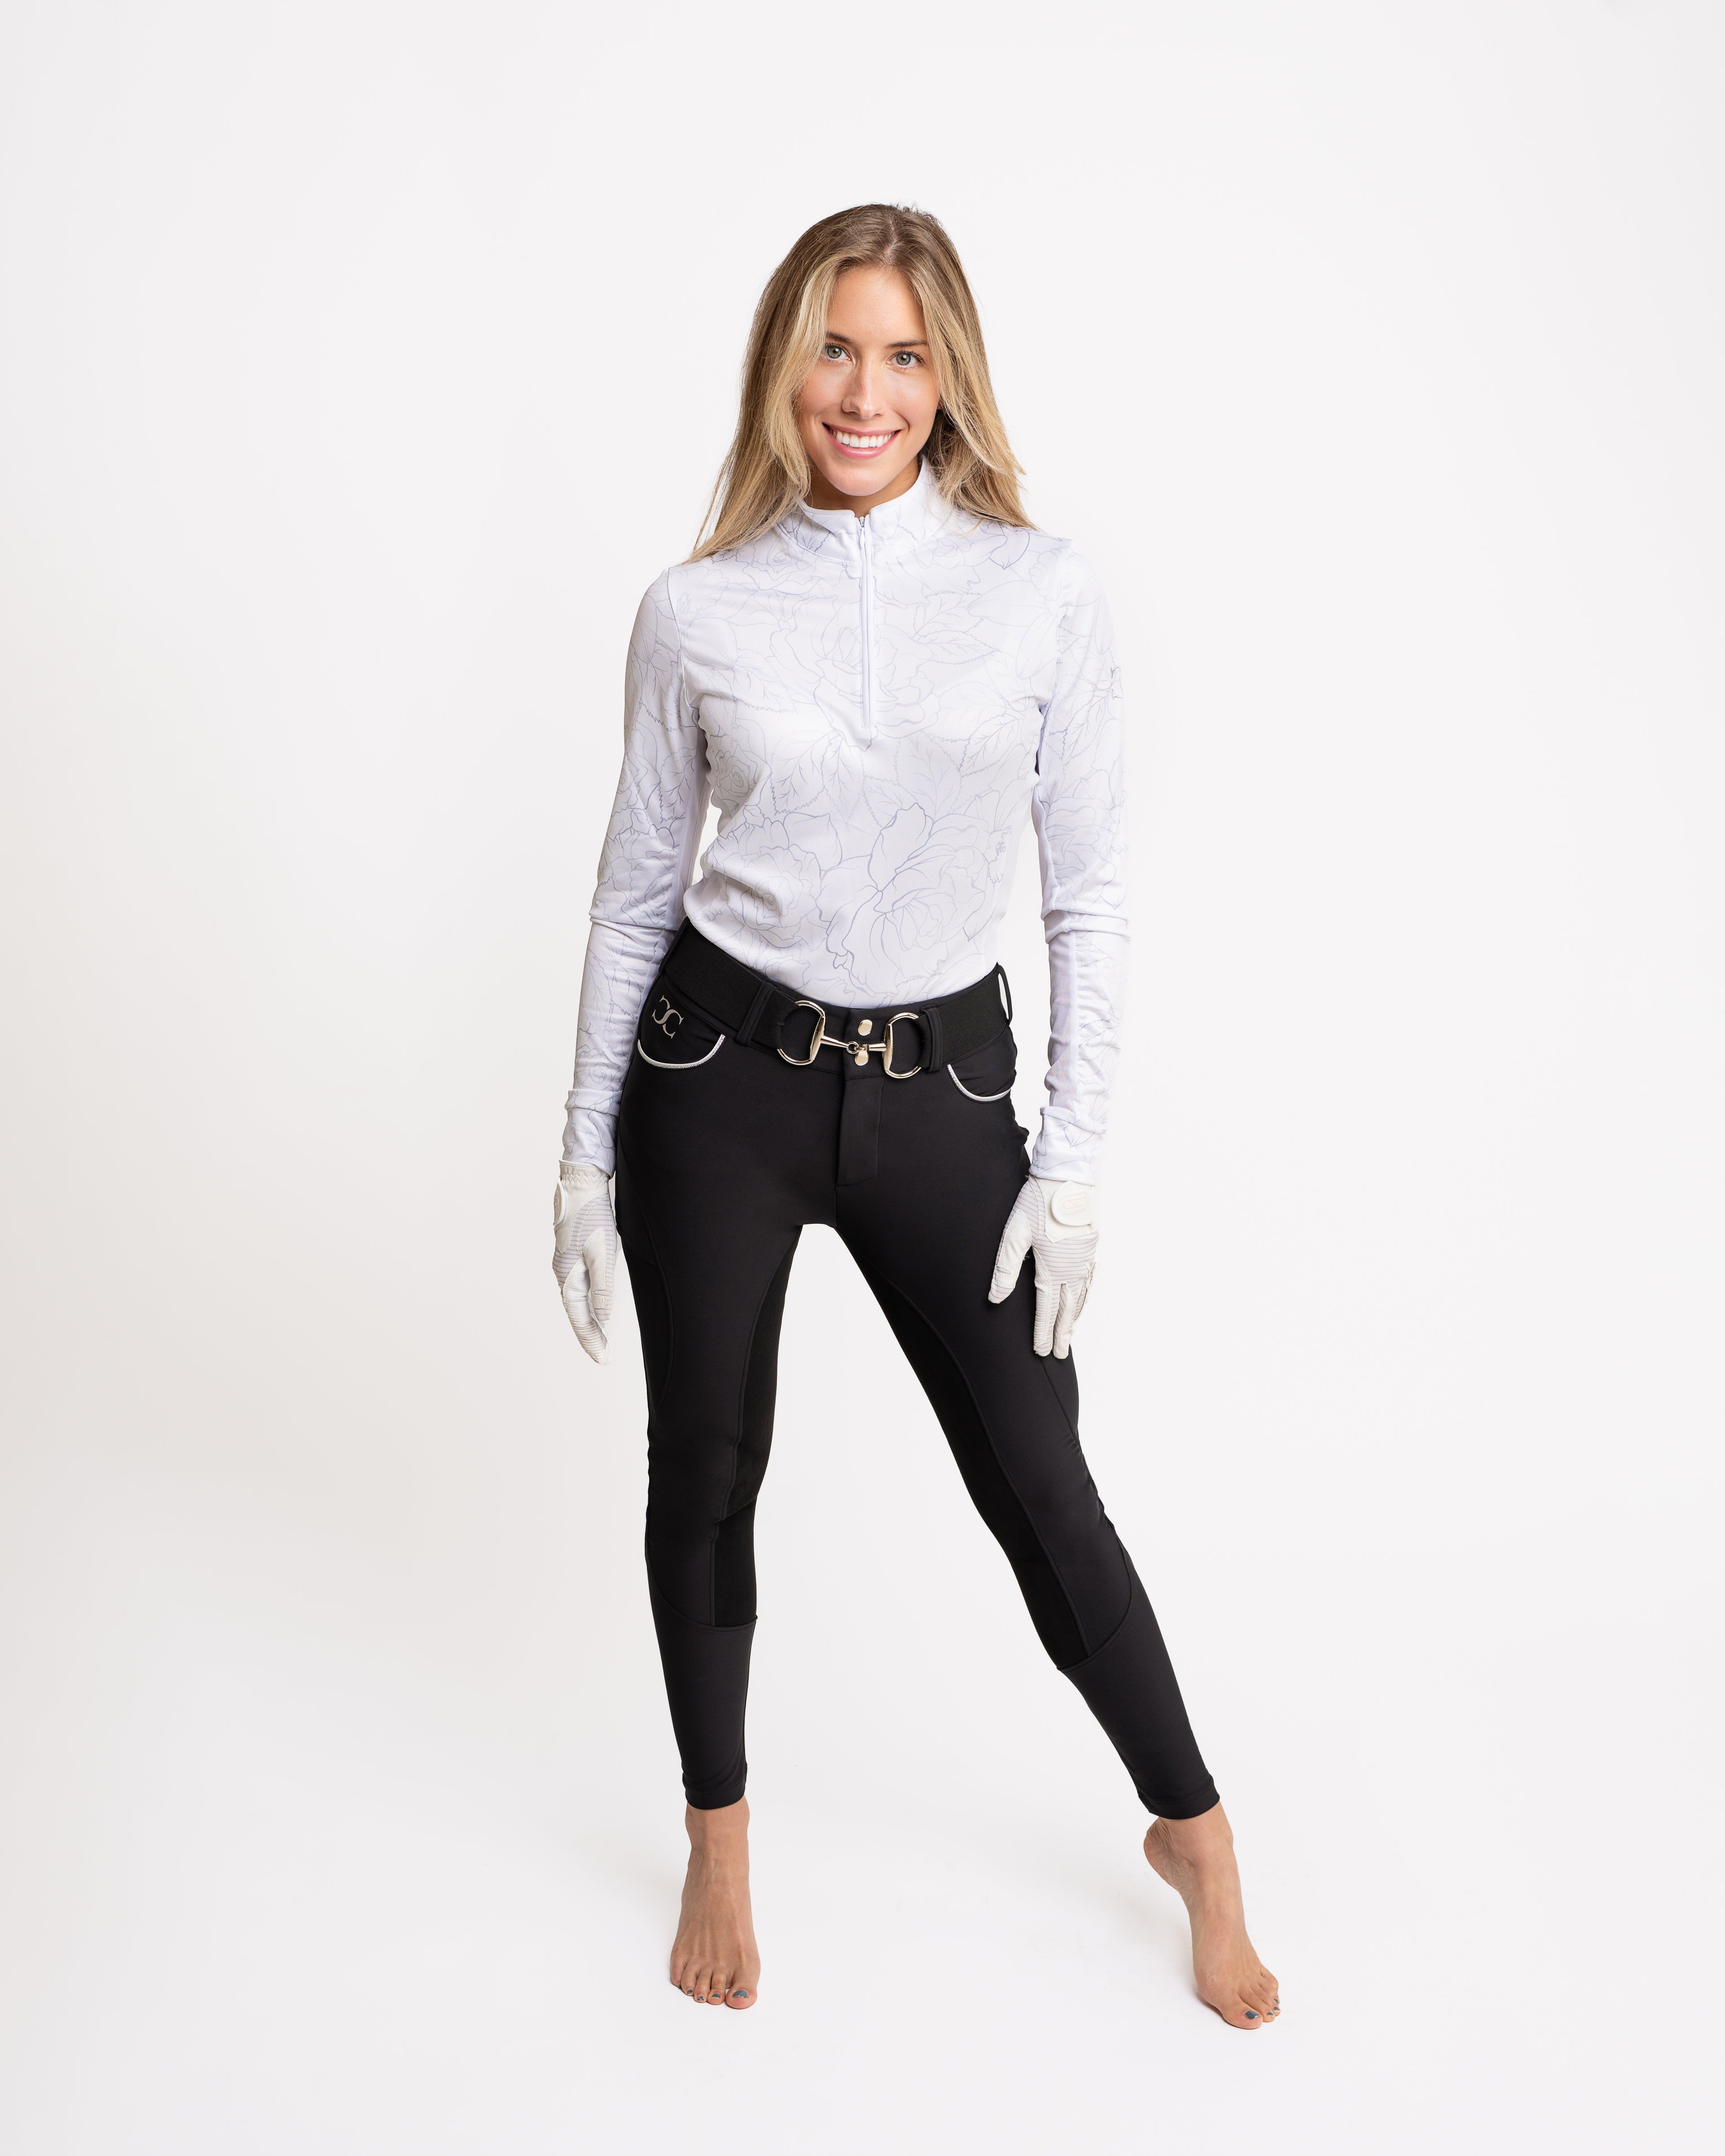 Black Breeches with Suede Seat – CorrectConnect